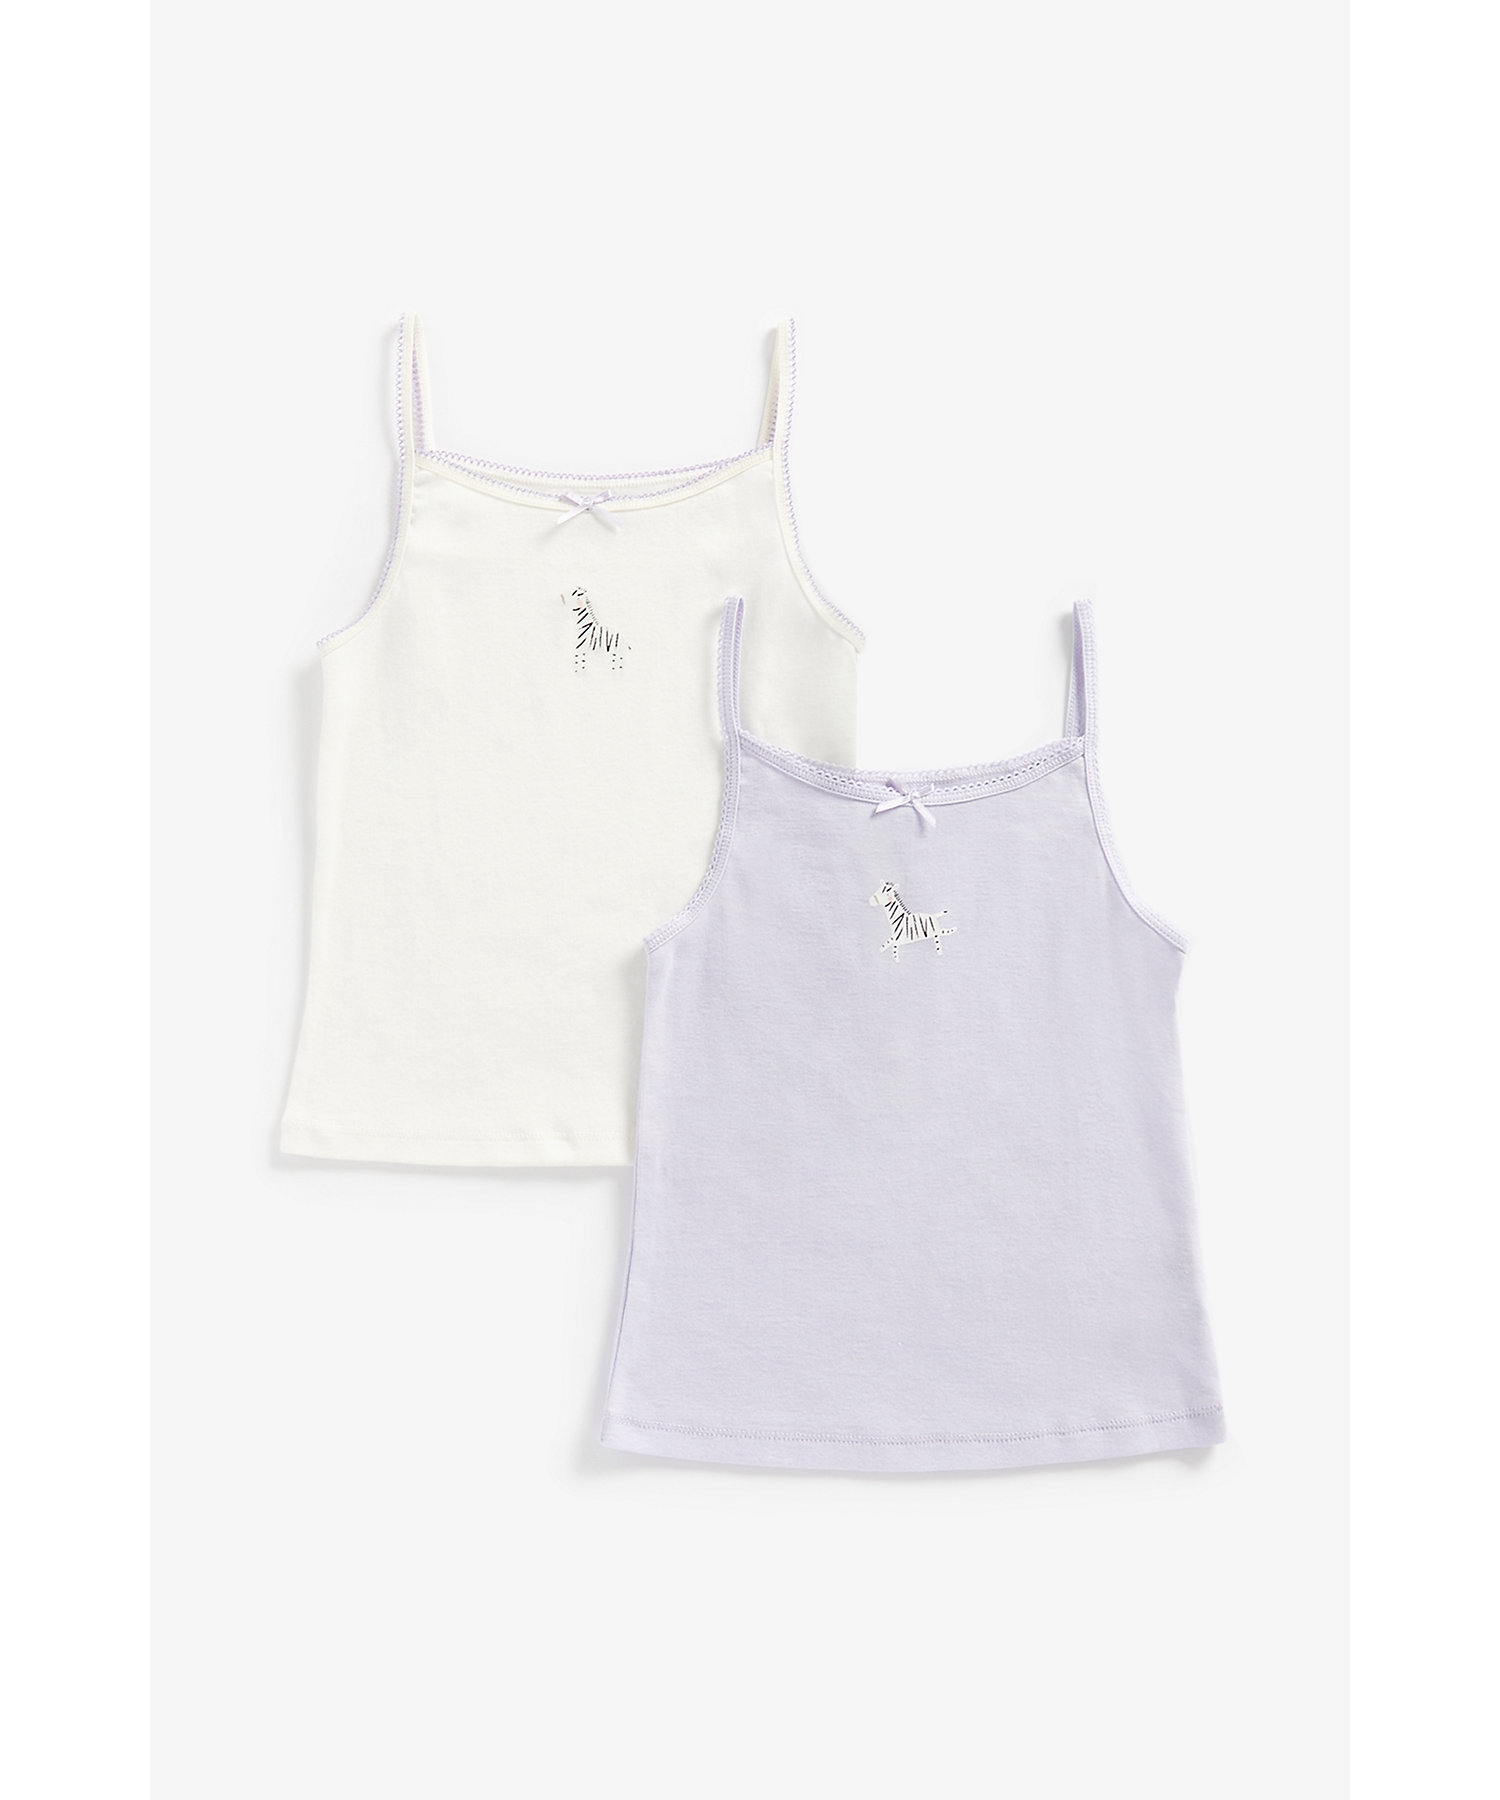 Mothercare | Girls Sleeveless Vest -Pack of 2-Pink